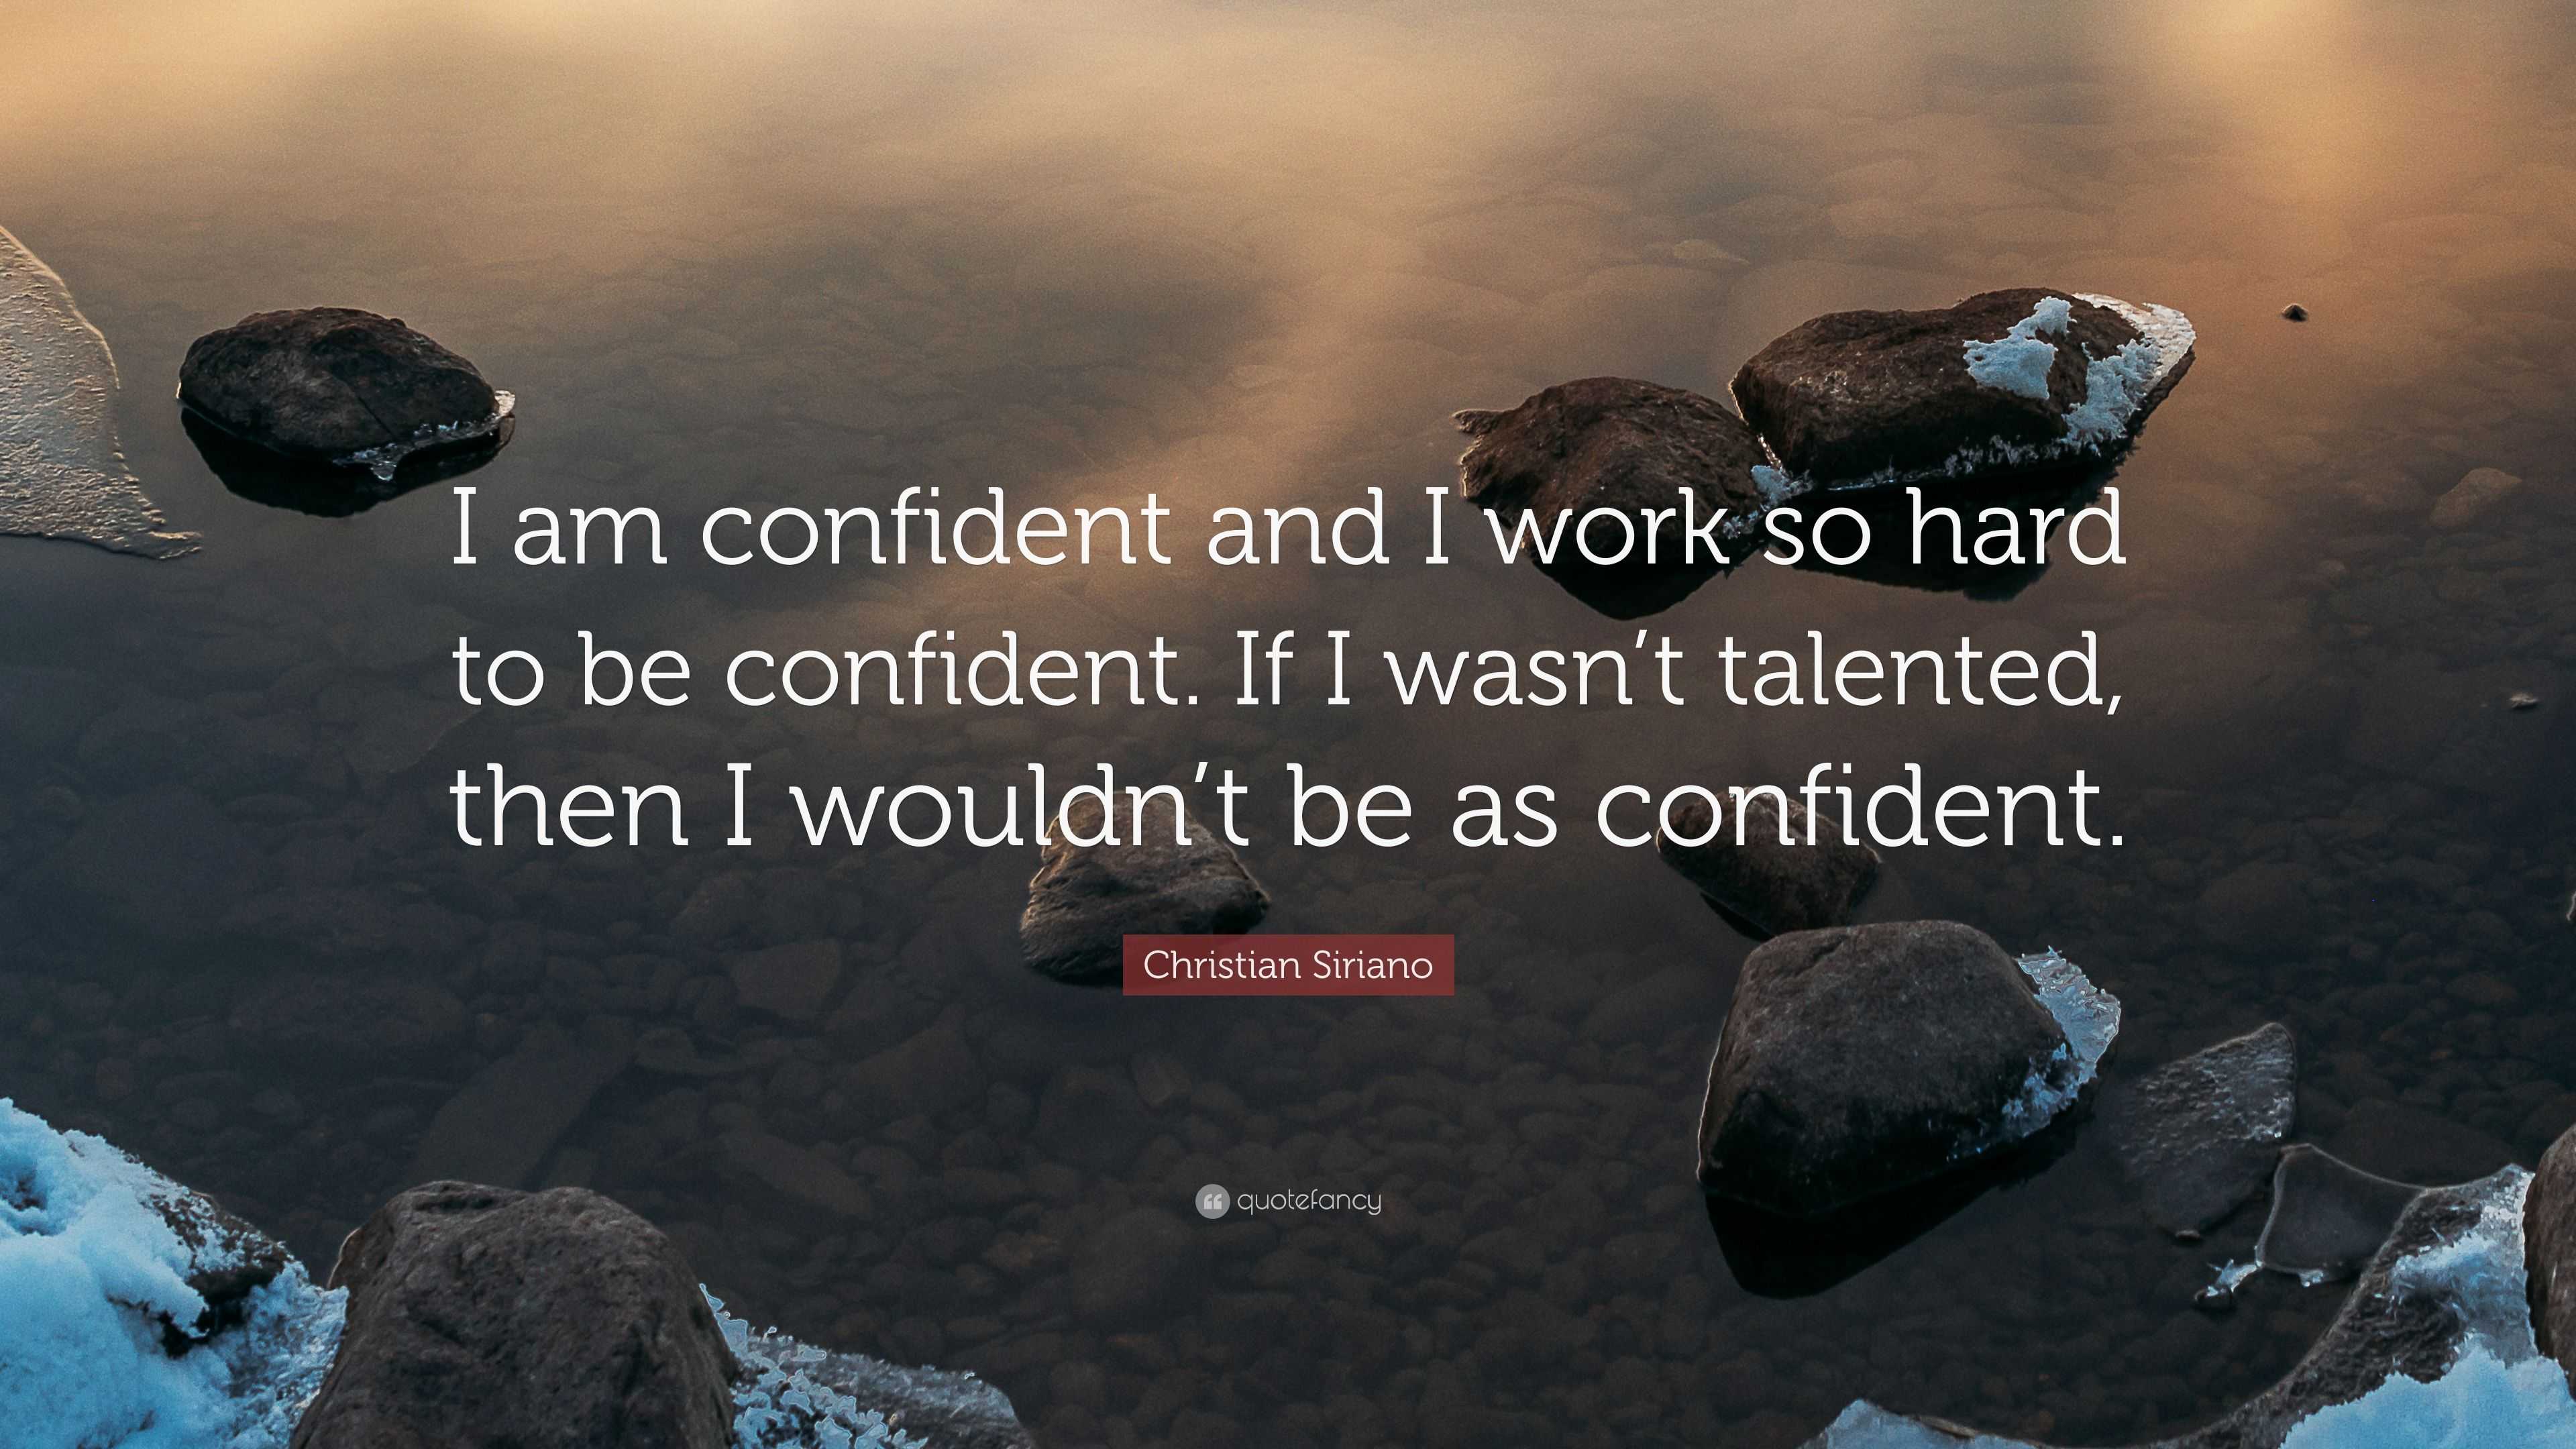 Christian Siriano Quote: “I am confident and I work so hard to be confident.  If I